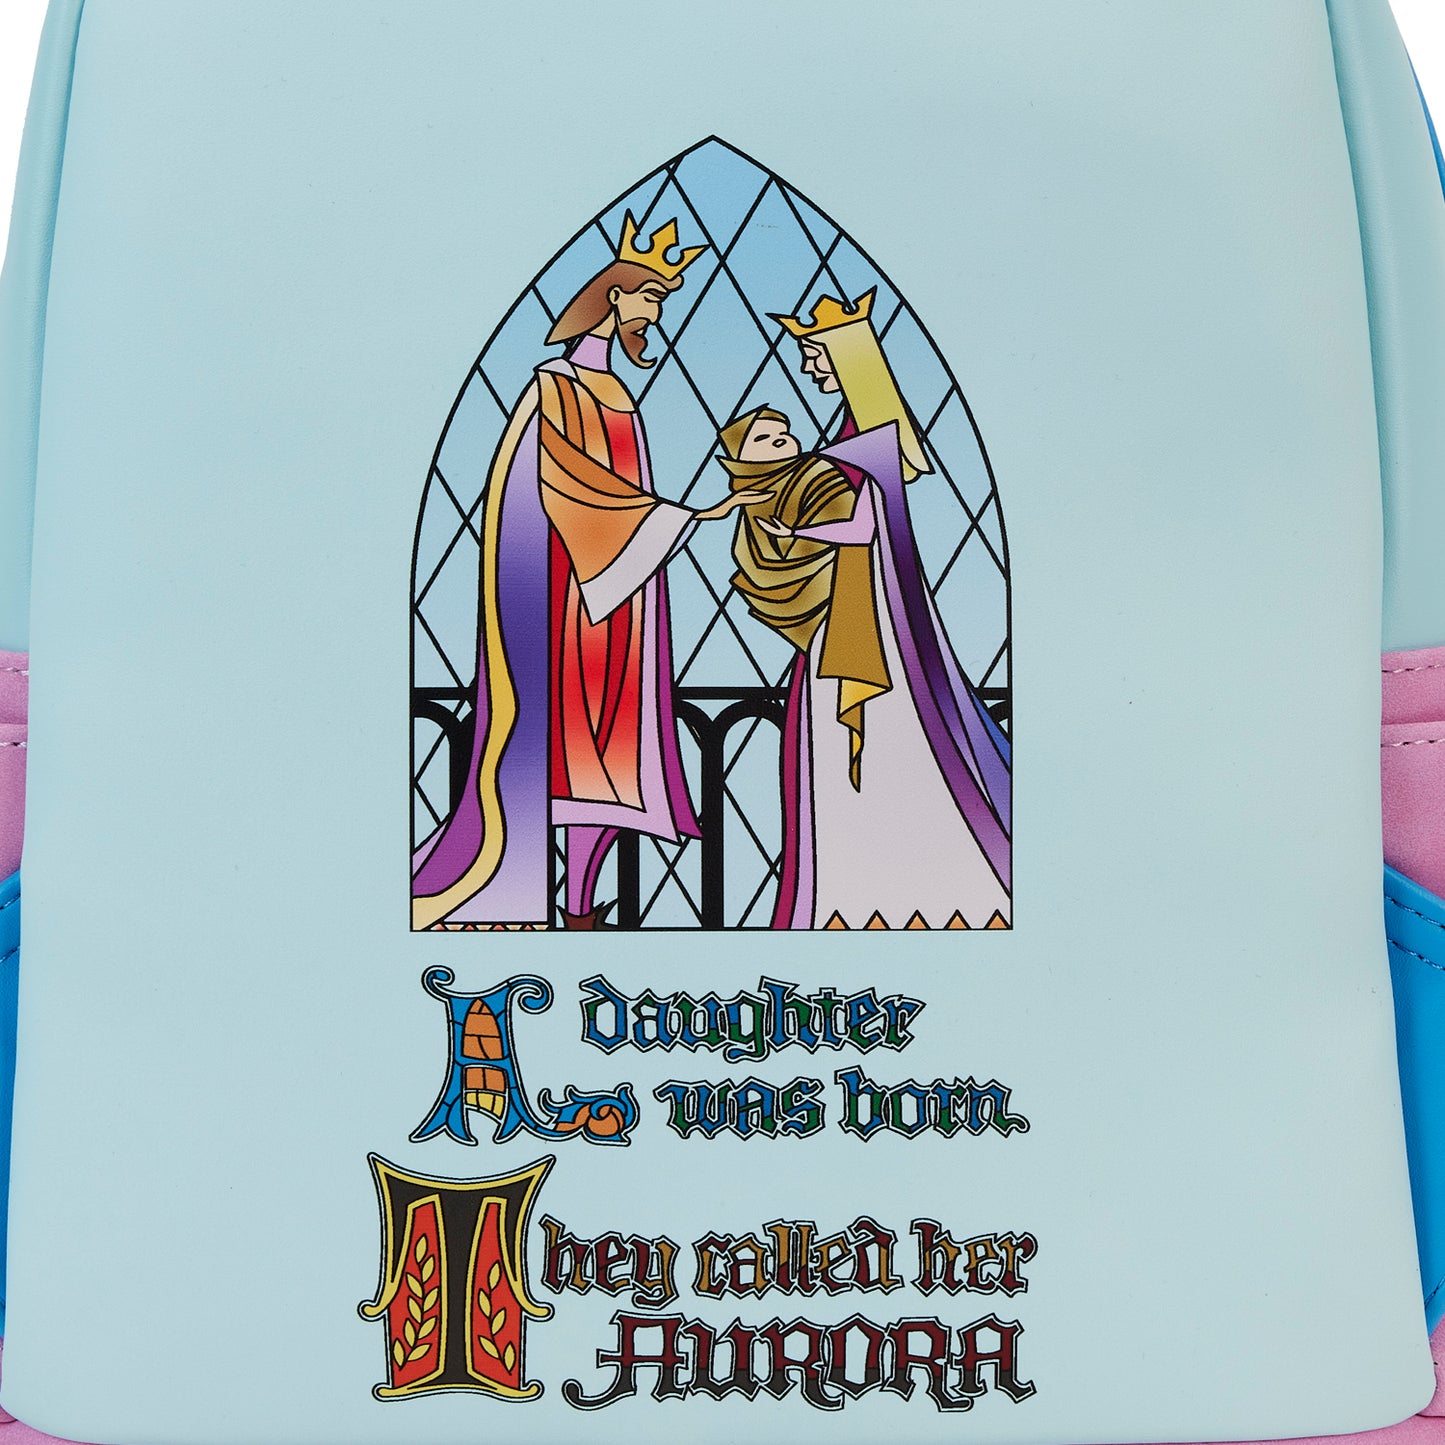 Sleeping Beauty Stained Glass Castle Mini Backpack